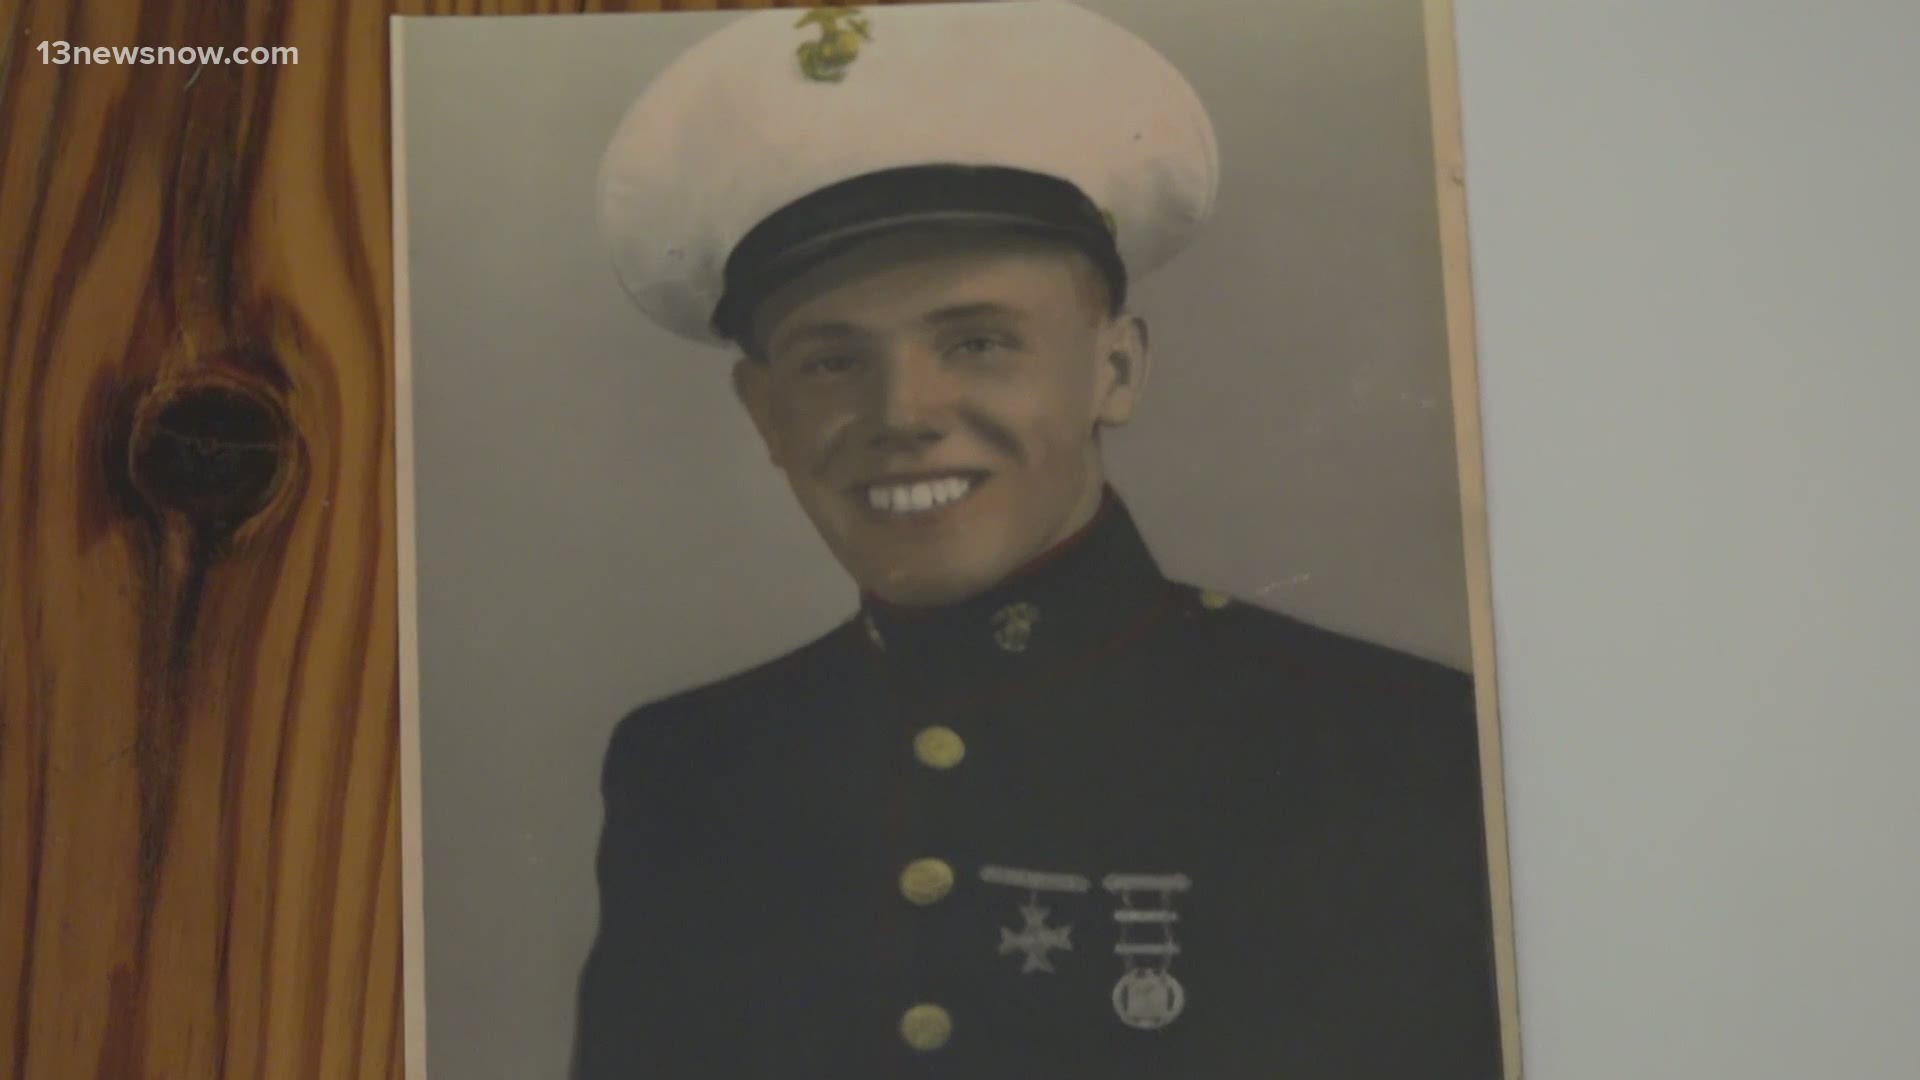 Harry Jackson Senior's children believe he earned the Medal of Honor when he served as a Marine in World War II. But, it's been an uphill battle.